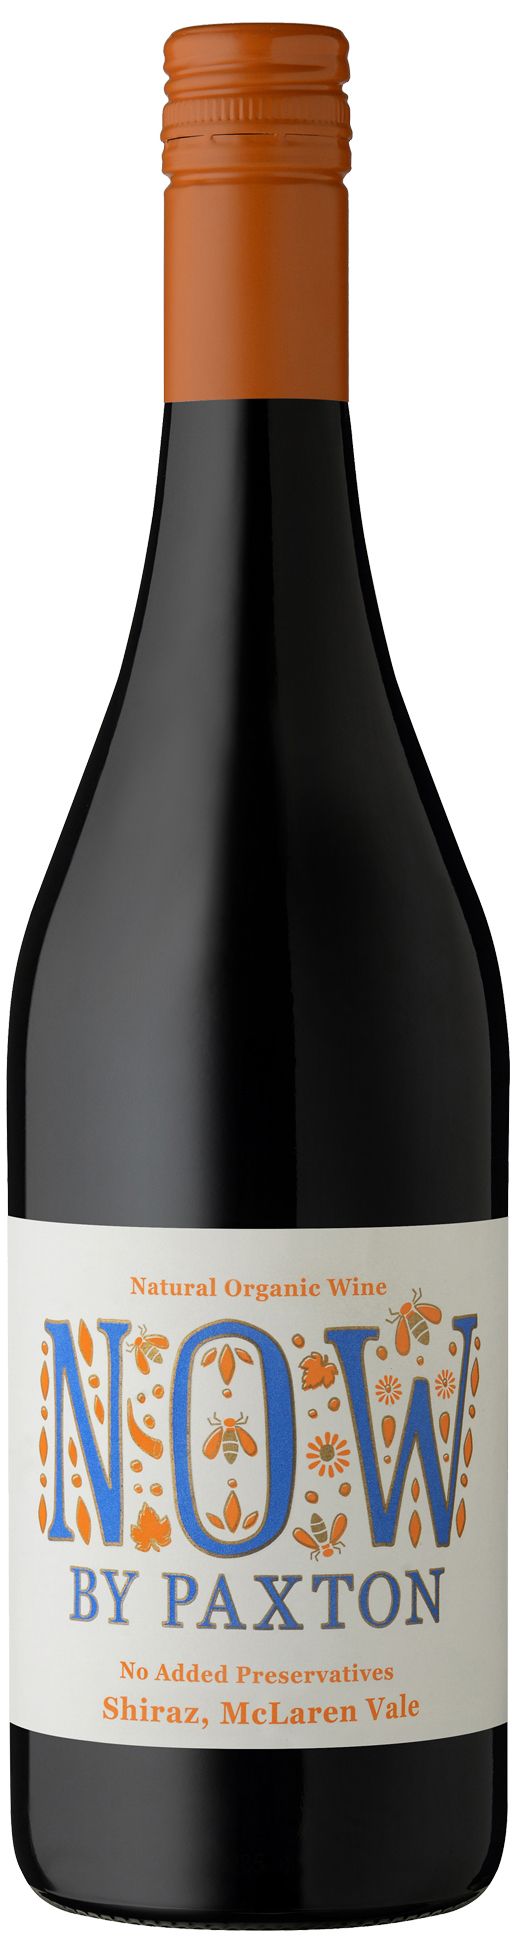 Paxton, Now By Paxton Shiraz, 2017